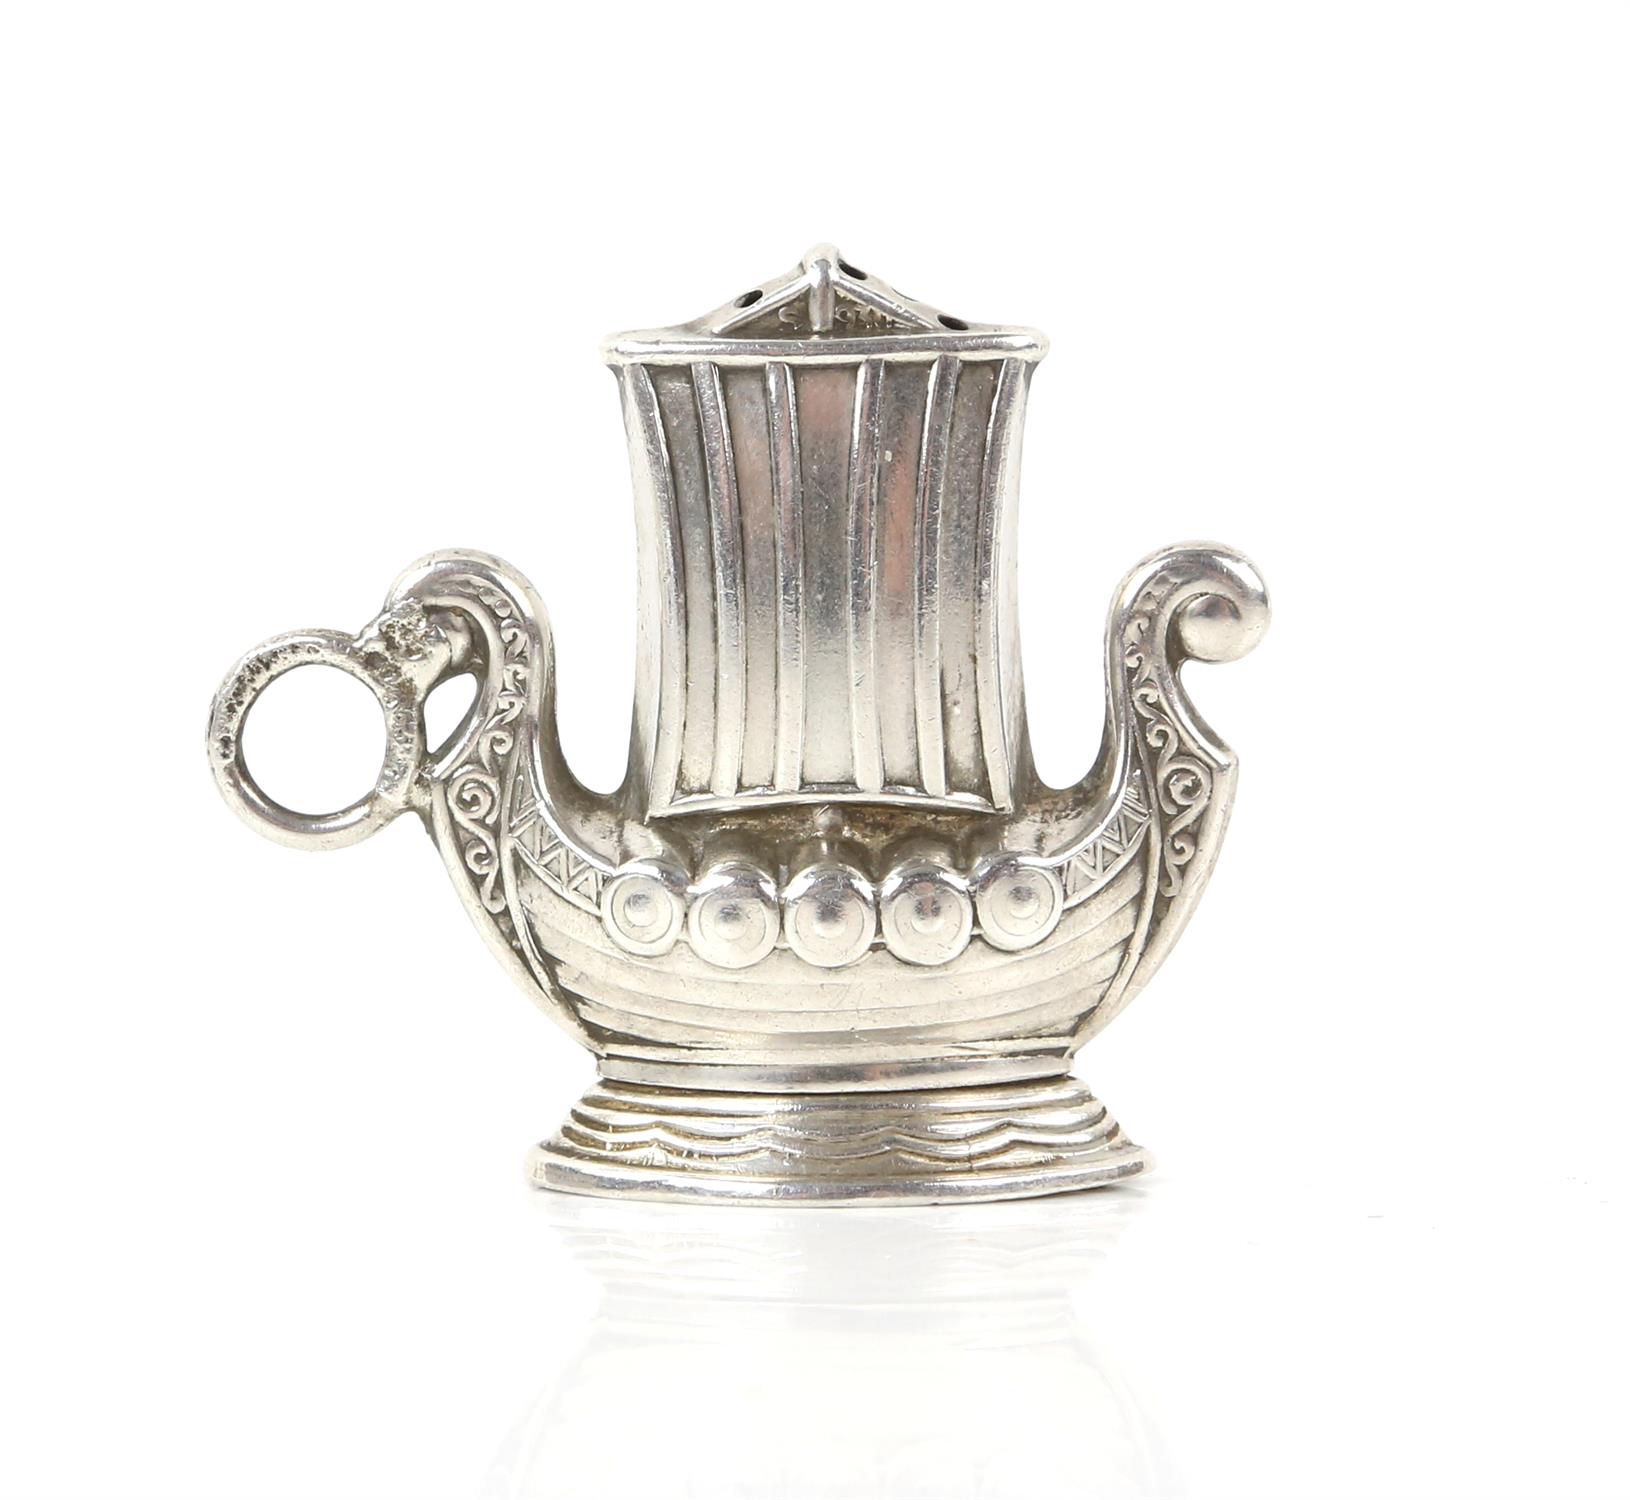 Novelty Norwegian sterling silver pepper pot in the form of a Viking boat - Image 2 of 3